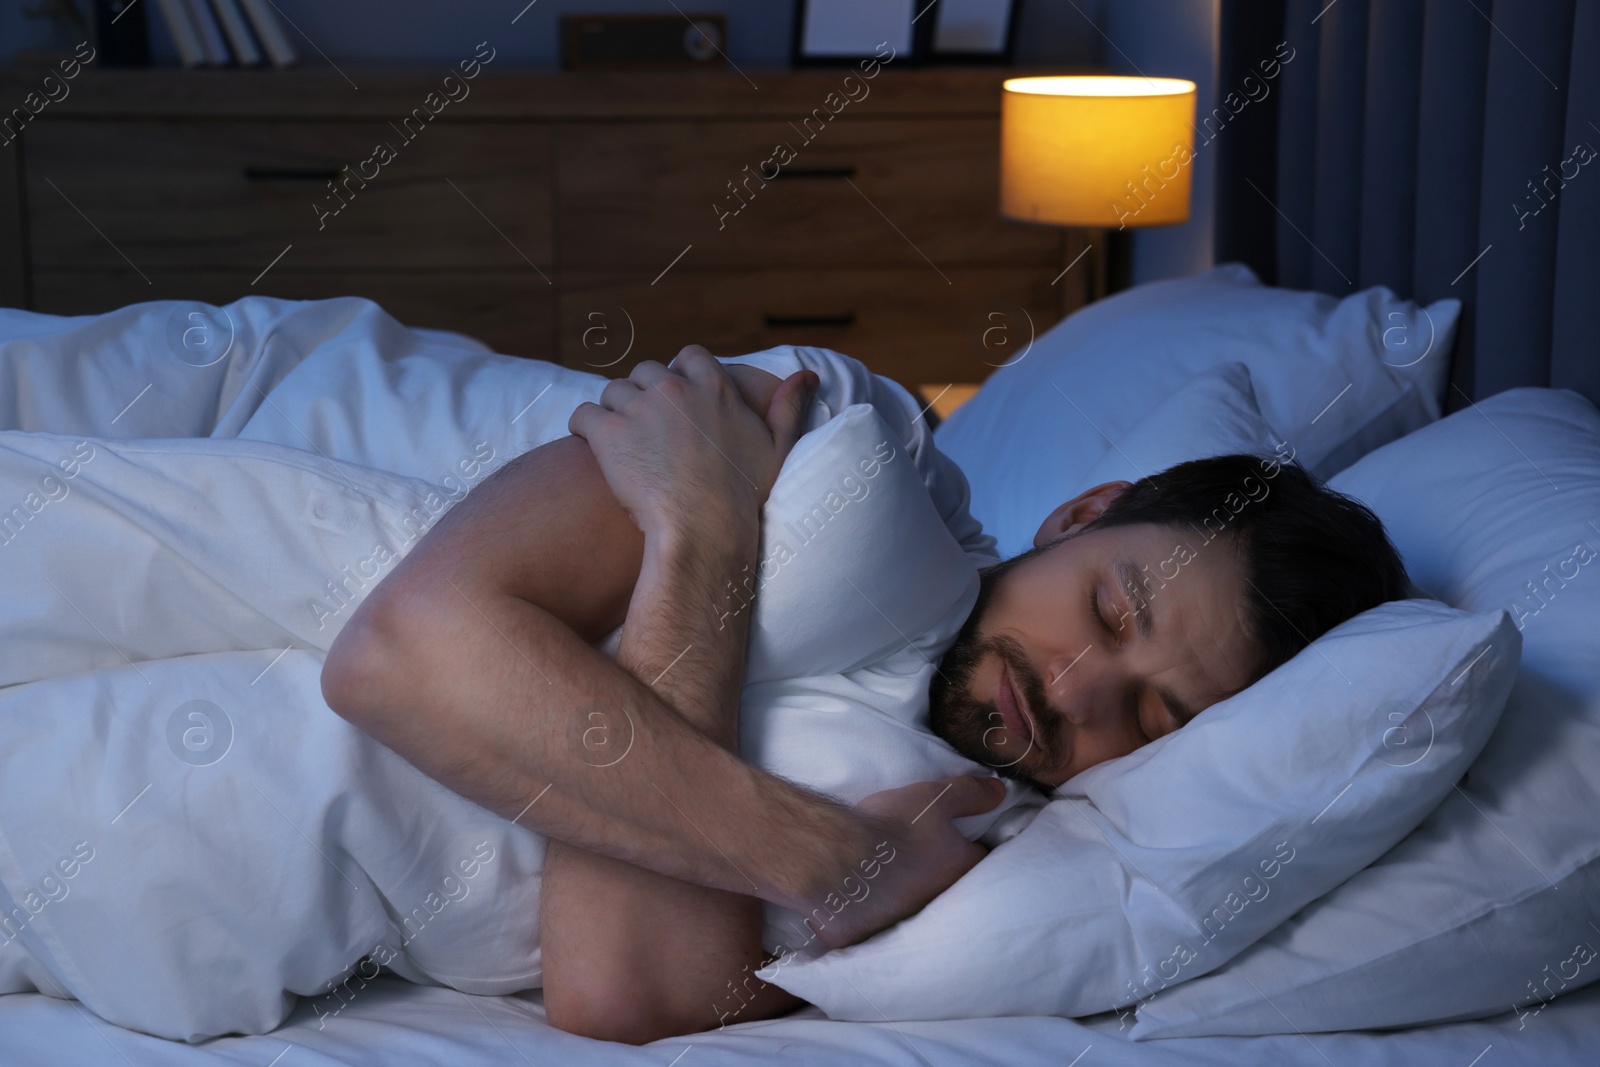 Photo of Handsome man sleeping in bed at night